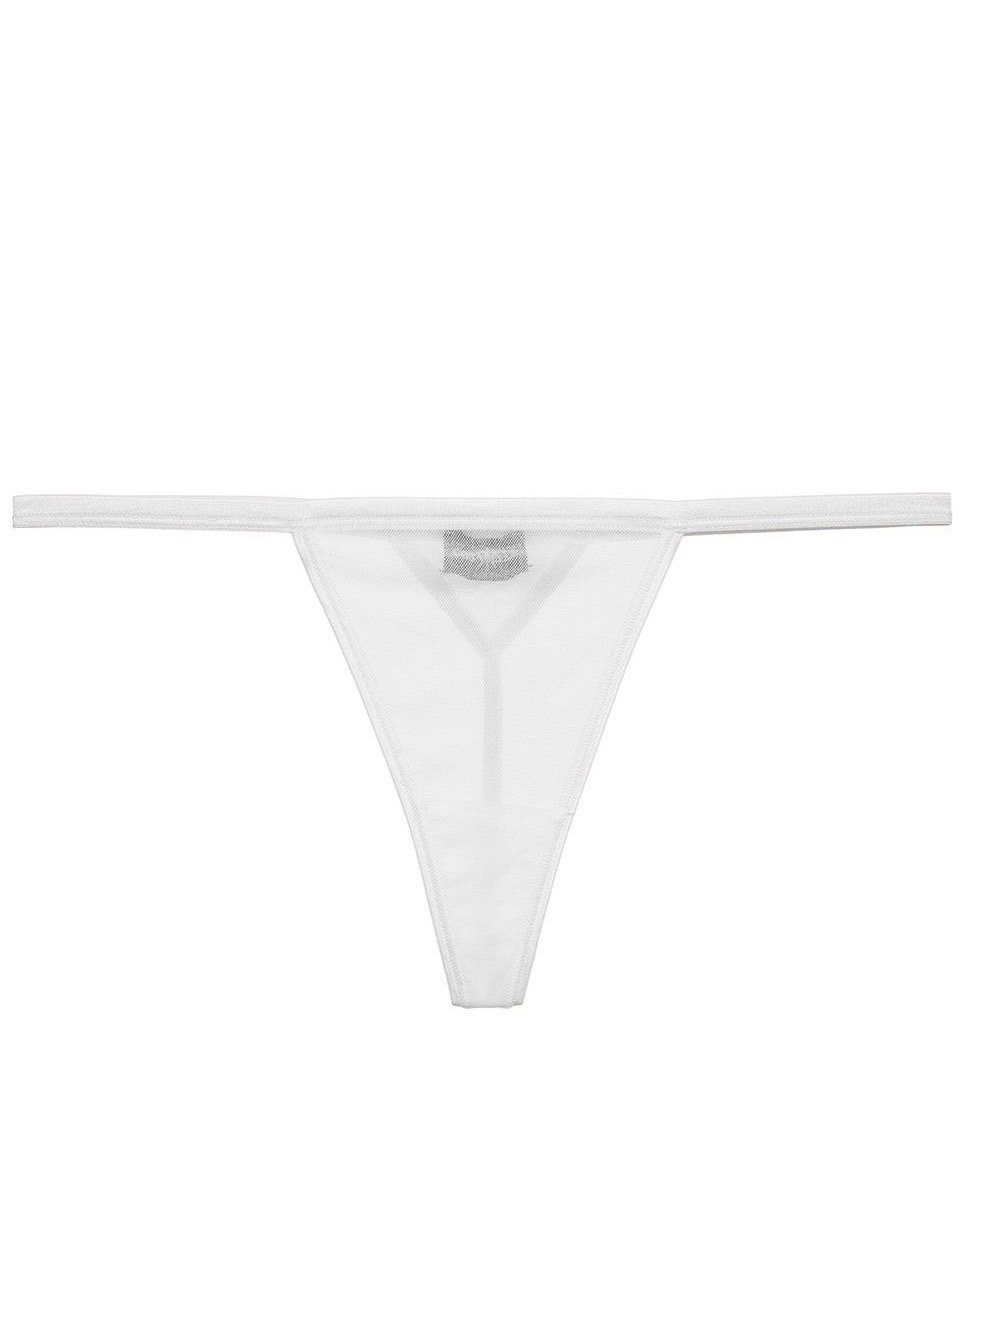 Cosabella G-STRINGS O/S (ONE SIZE) / MOON IVORY Cosabella CONFIDENCE Sexy G Strings Panties